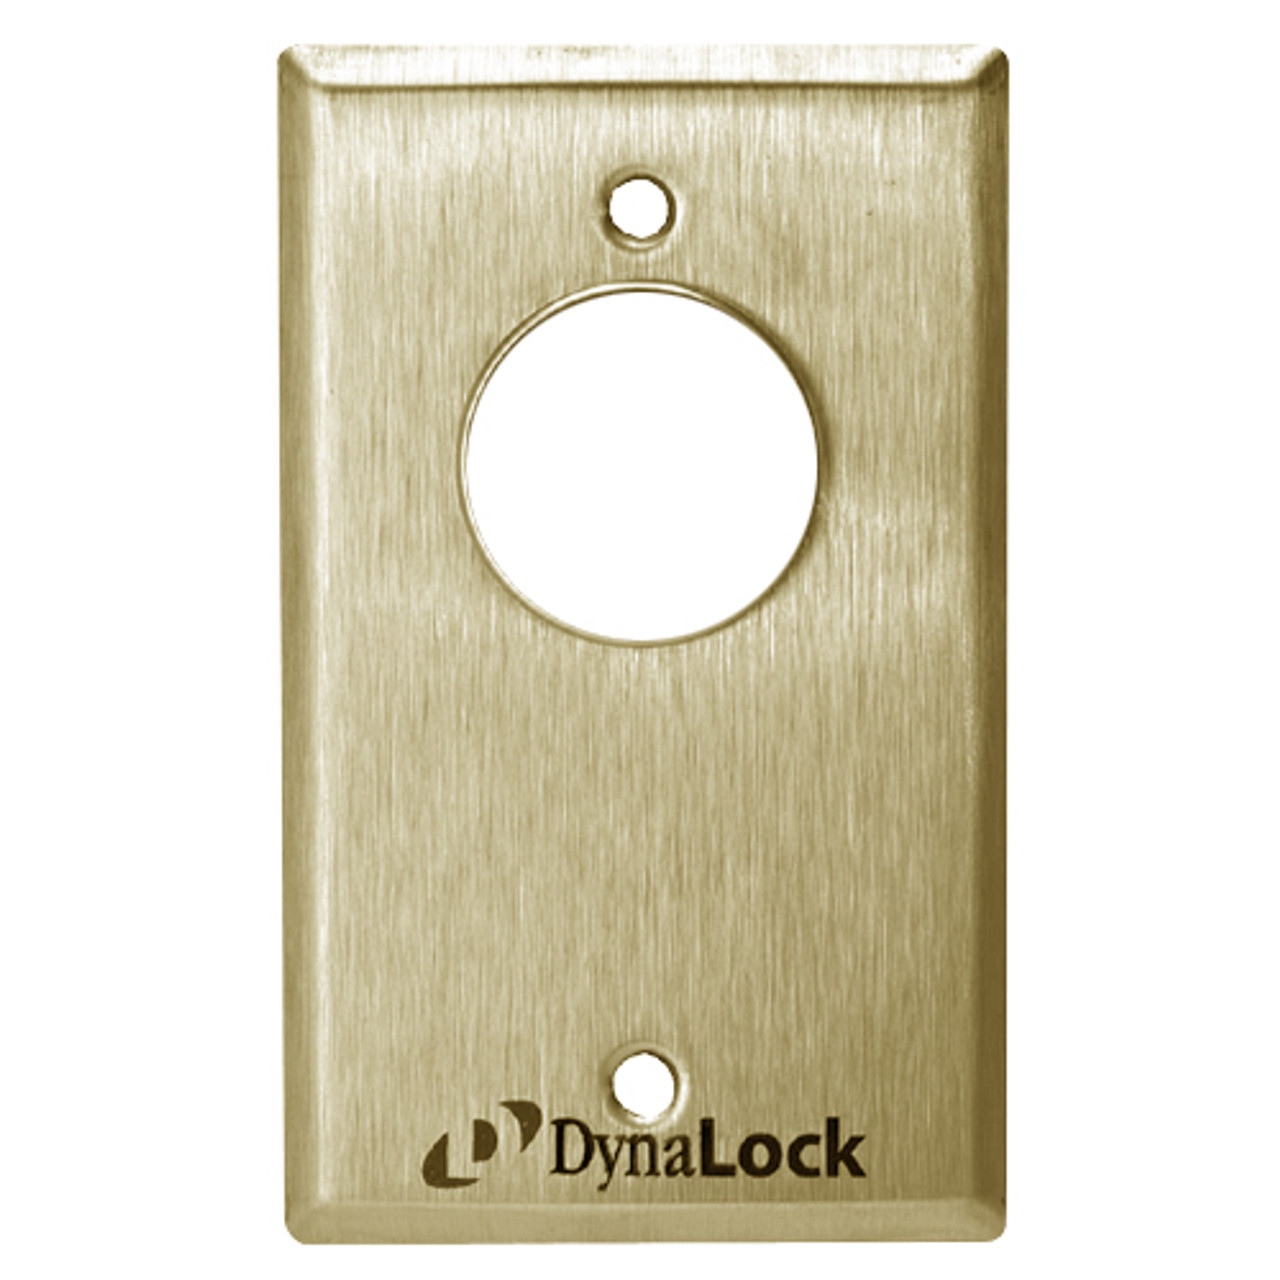 7022-US4-ATS DynaLock 7000 Series Keyswitches Momentary 1 Double Pole Double Throw with Anti-Tamper Switch in Satin Brass